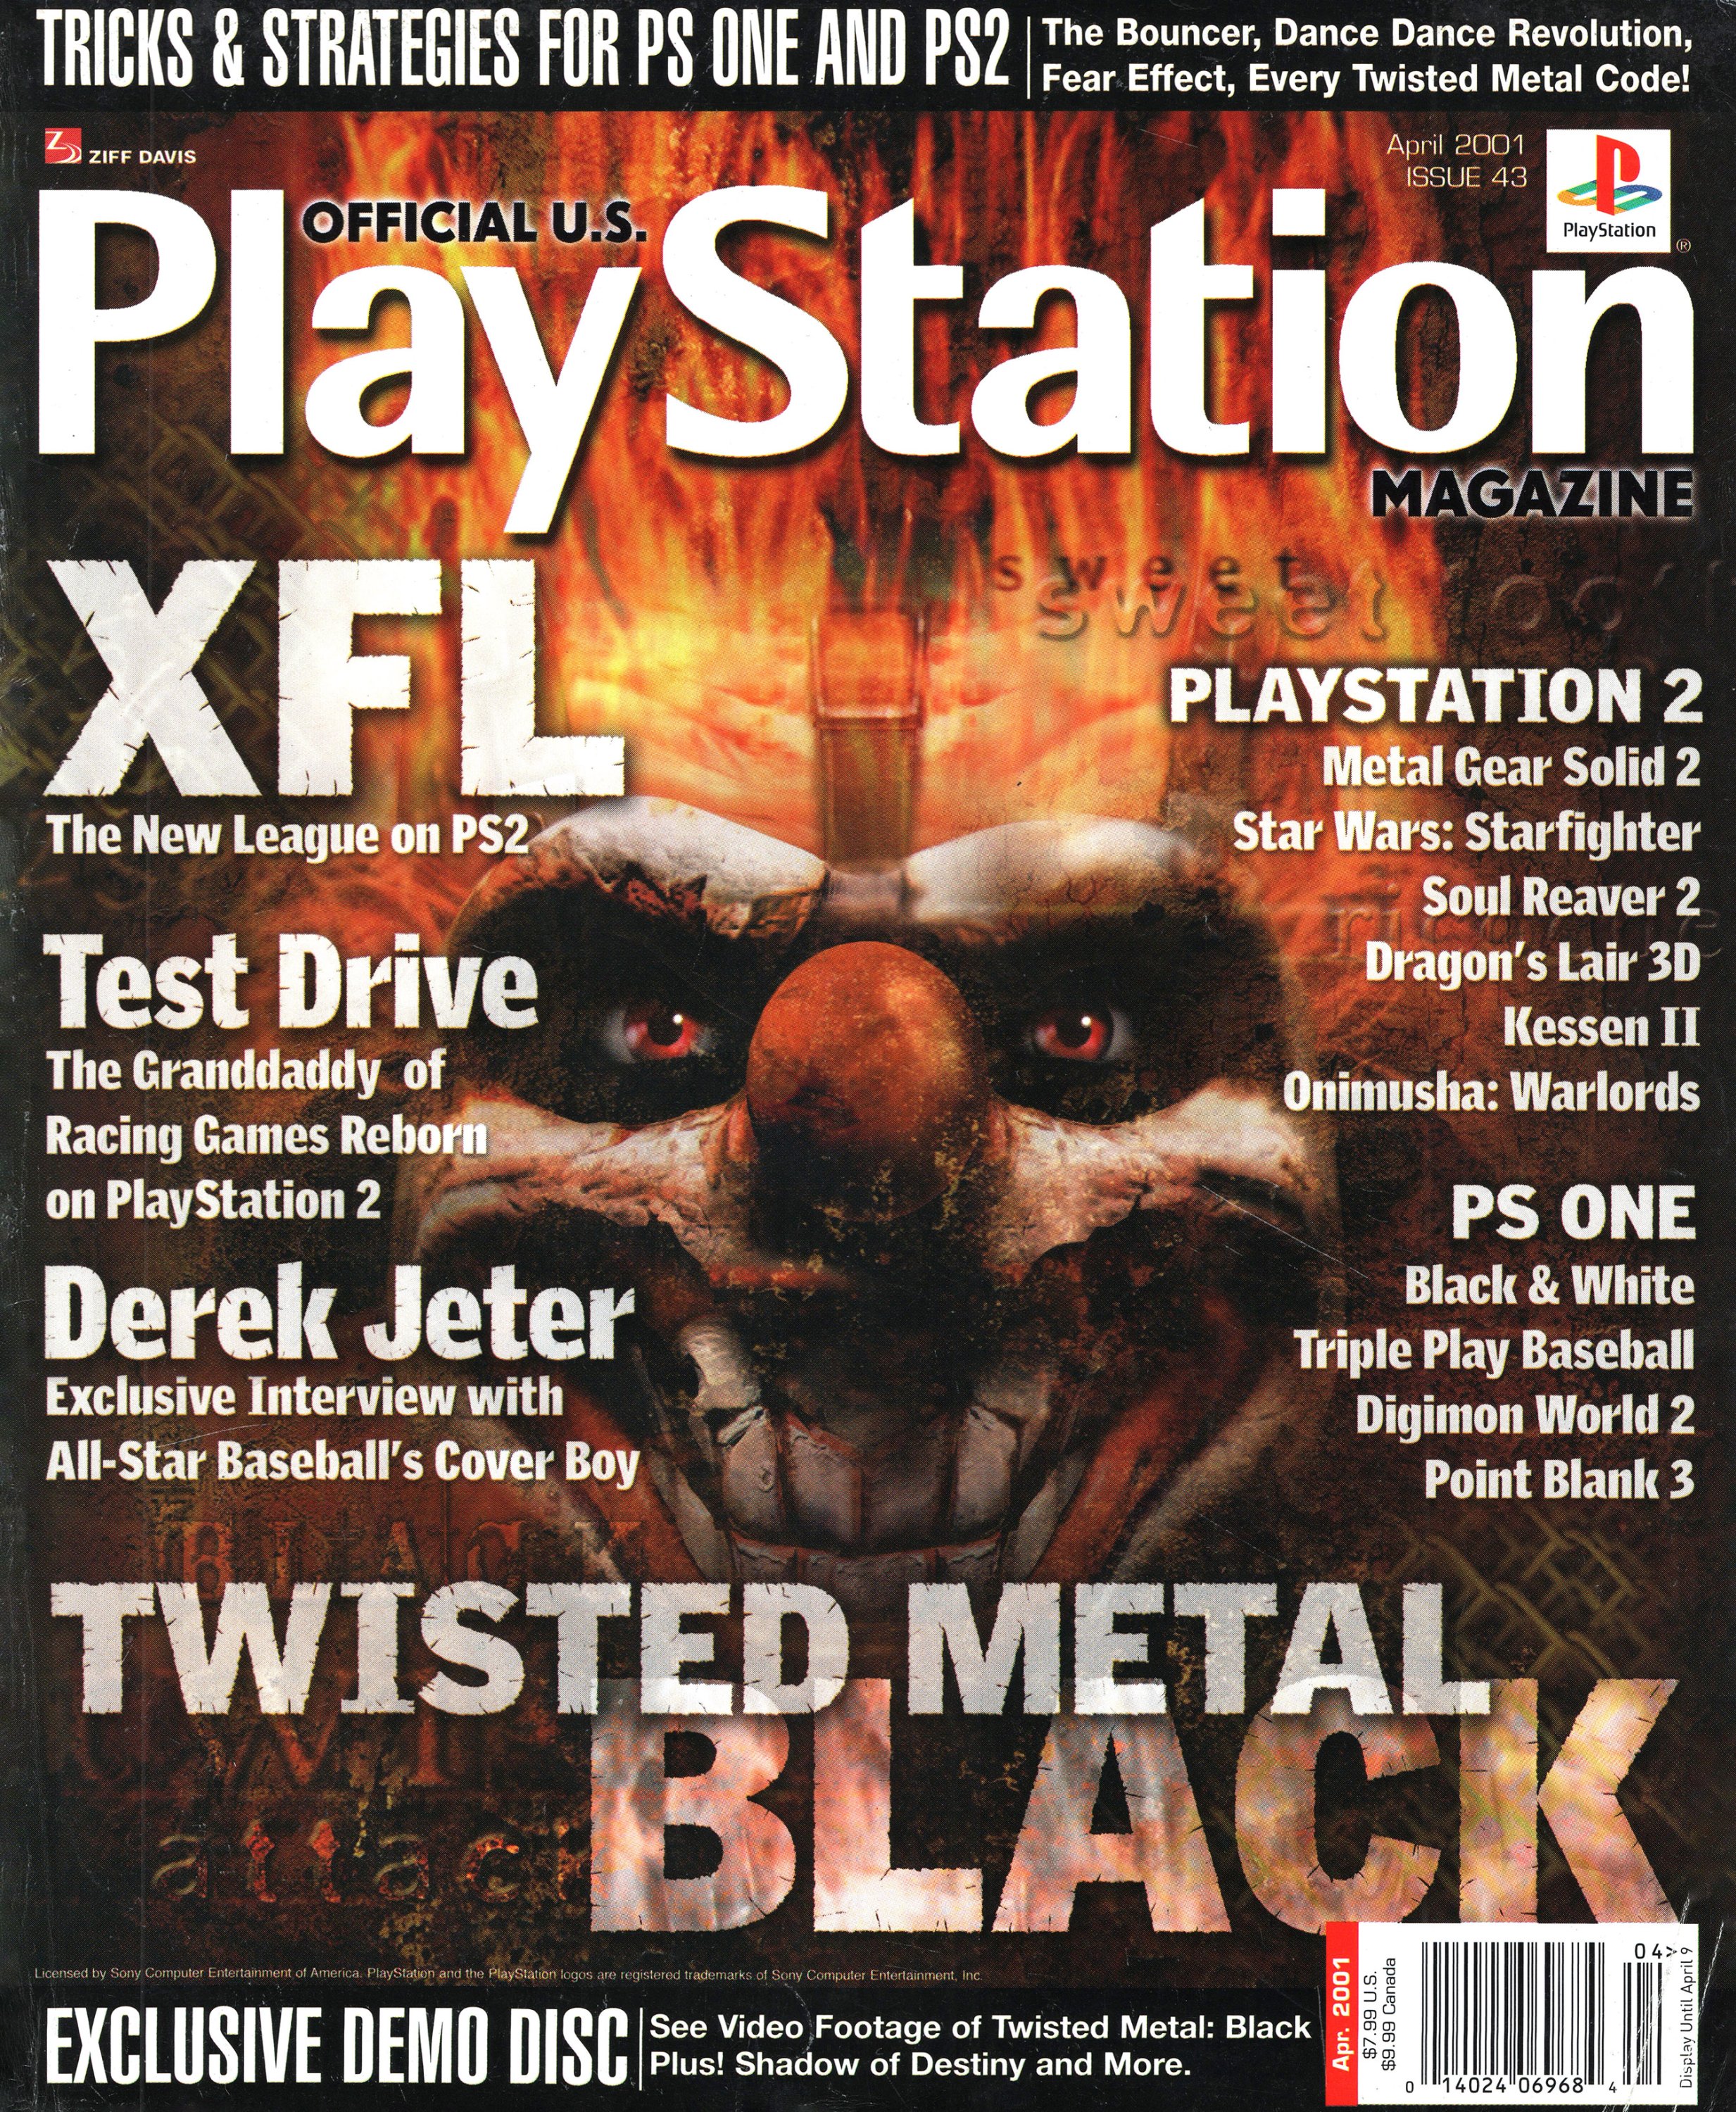 Official U.S. PlayStation Magazine Issue 043 (April 2001)